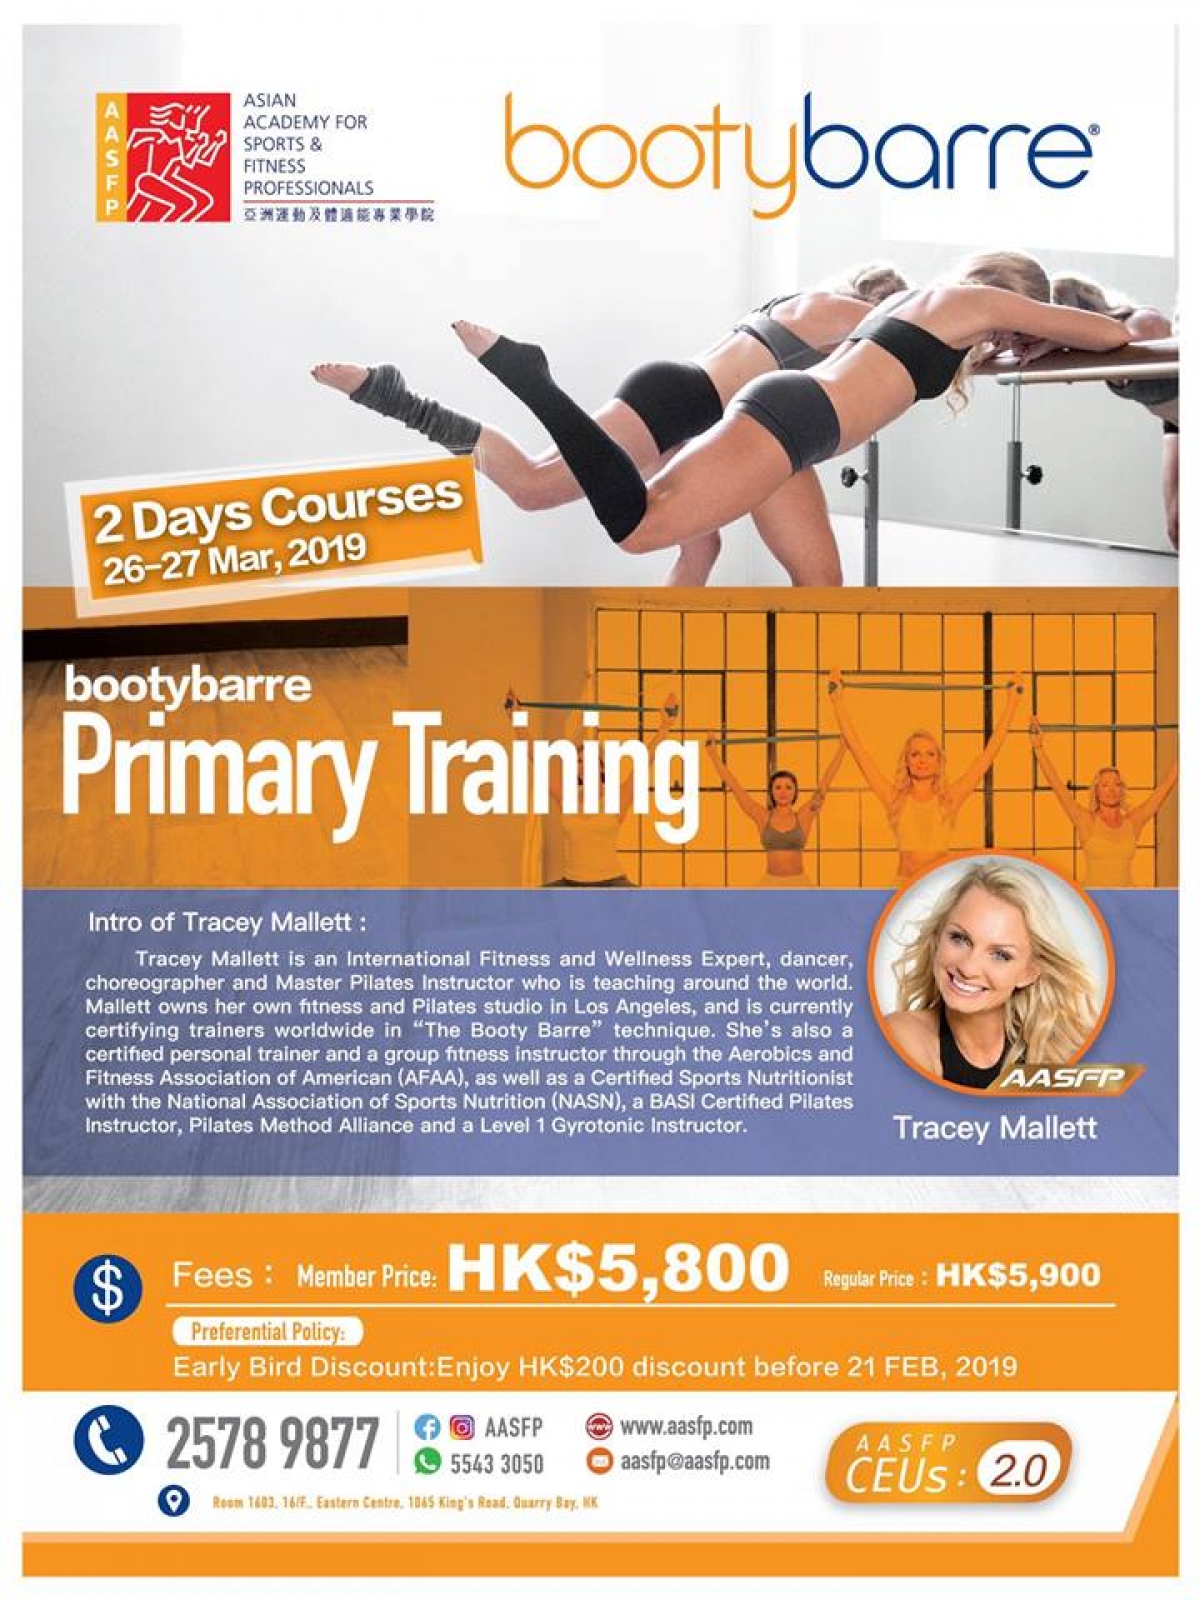 Bootybarre Primary Training Two Days Courses:26-27 Mar, 2019